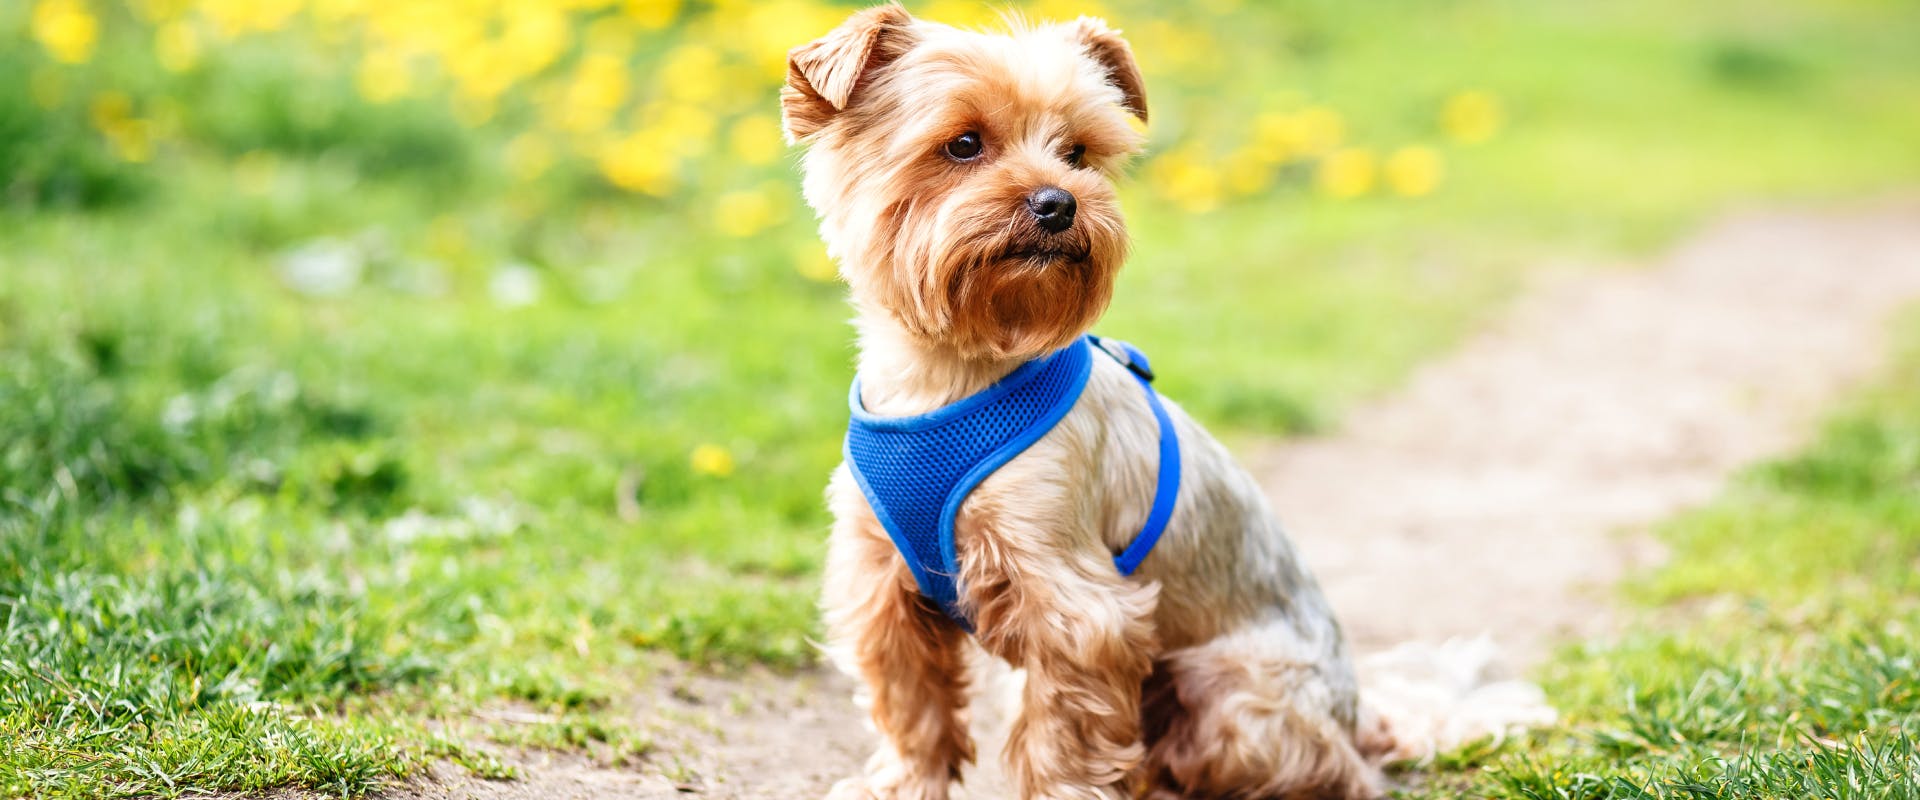 A small dog wearing a harness.